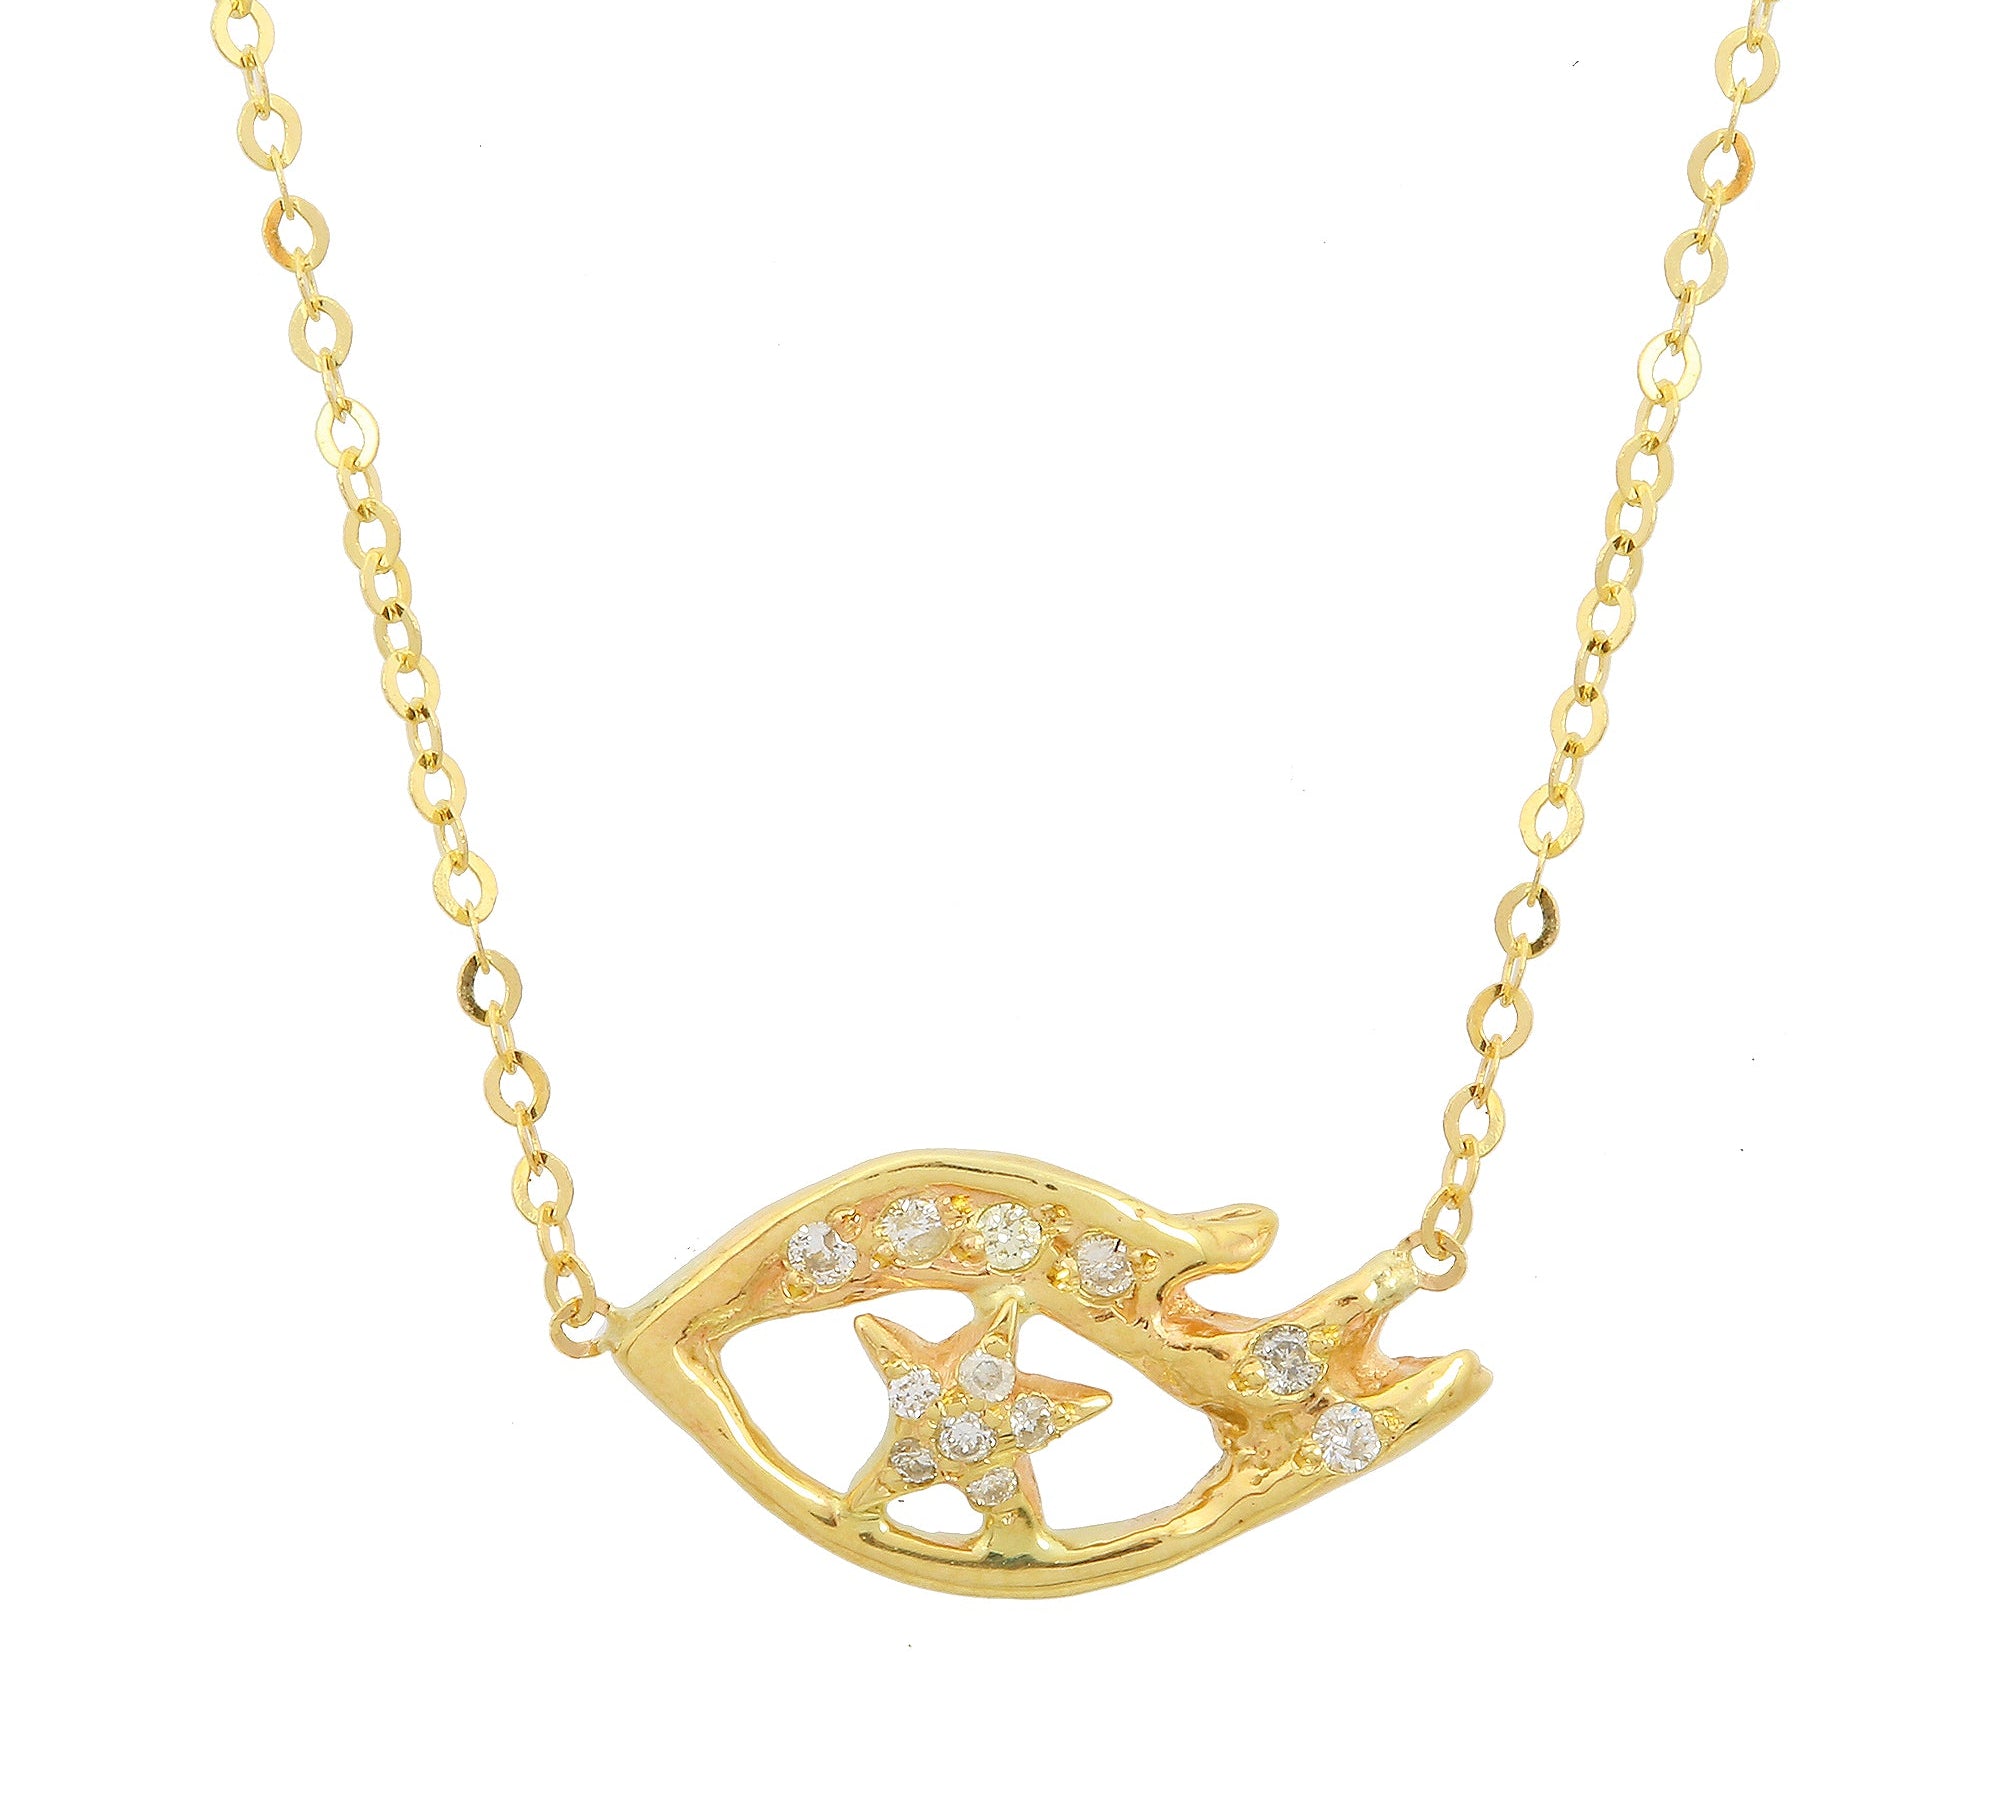 Starry Eyed Necklace, Yellow Gold and Diamond Pendant Jaine K Designs   